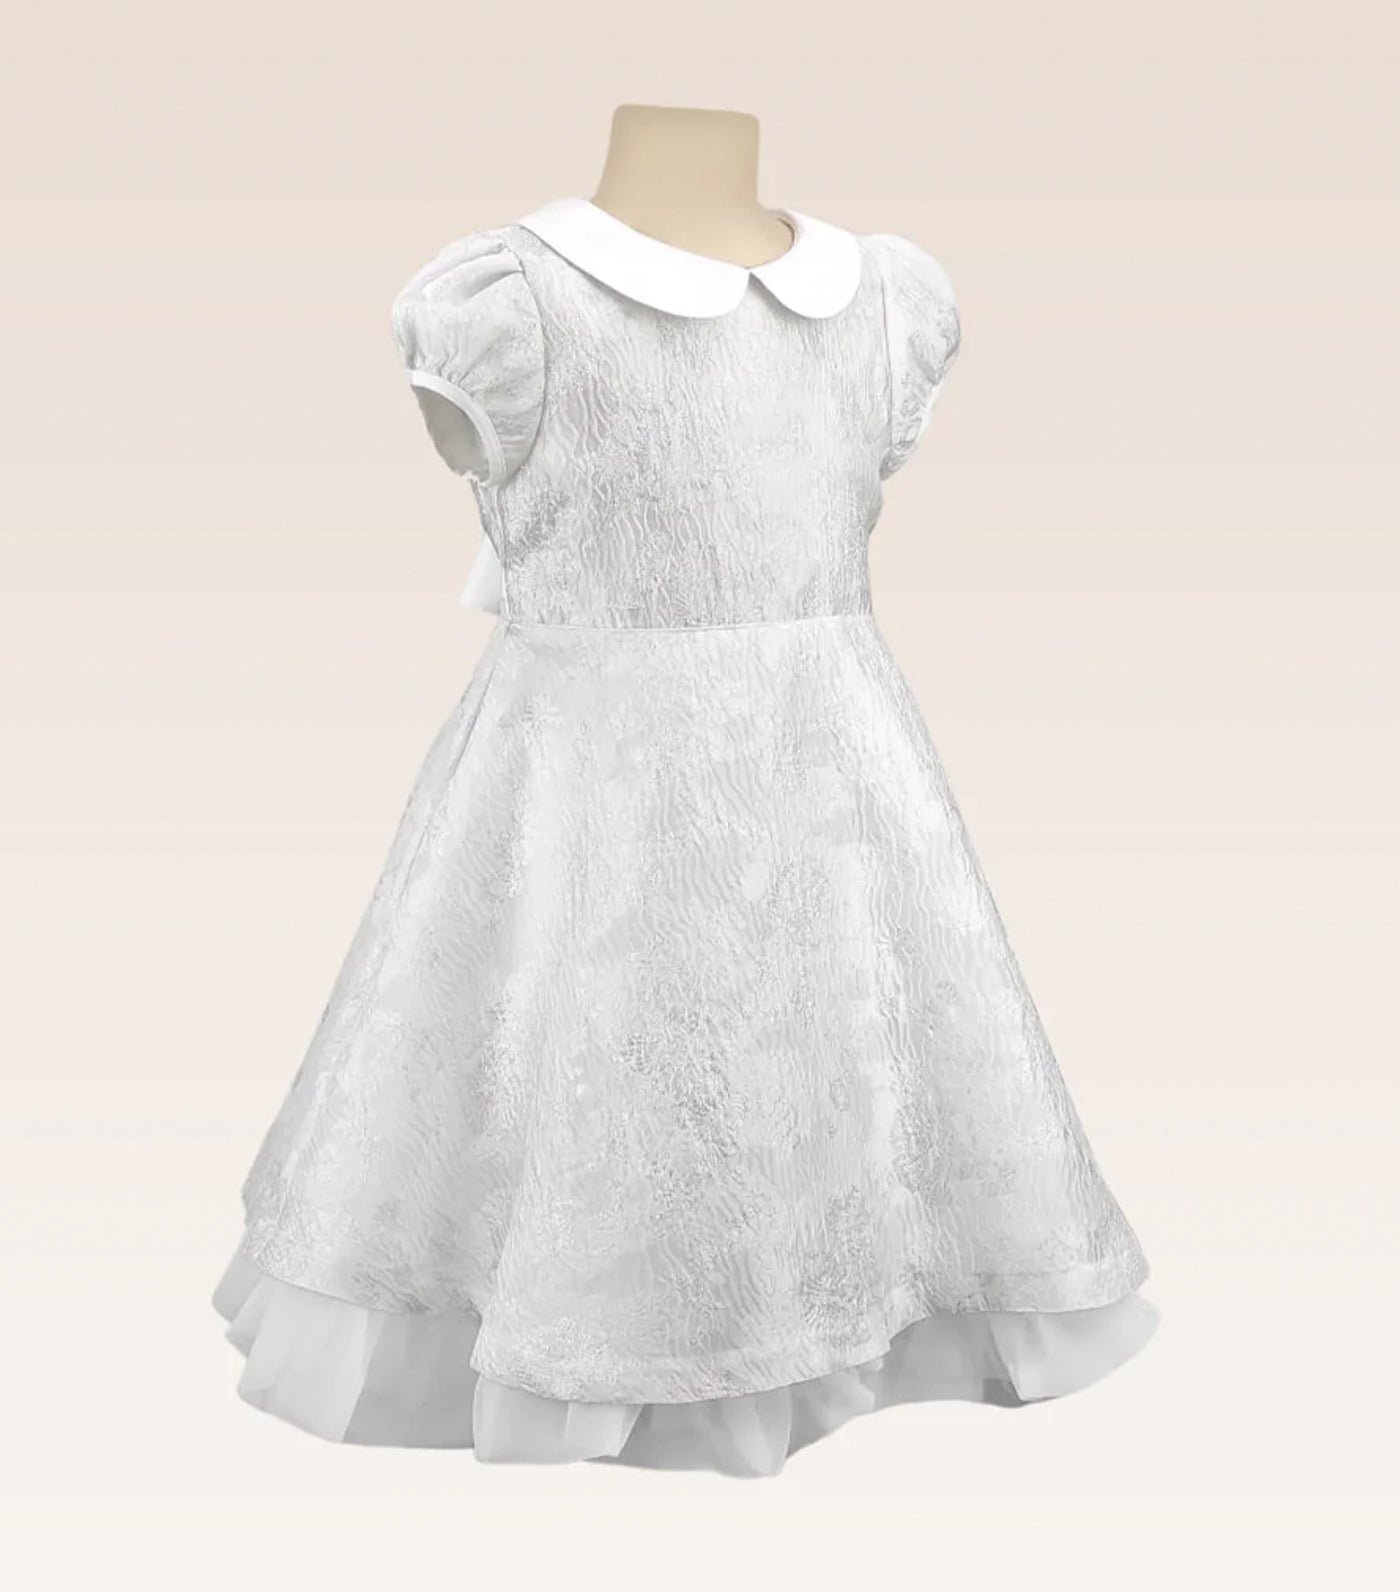 Georgette Girls Silver Jacquard Party Dress with Tulle Underlay Skirt